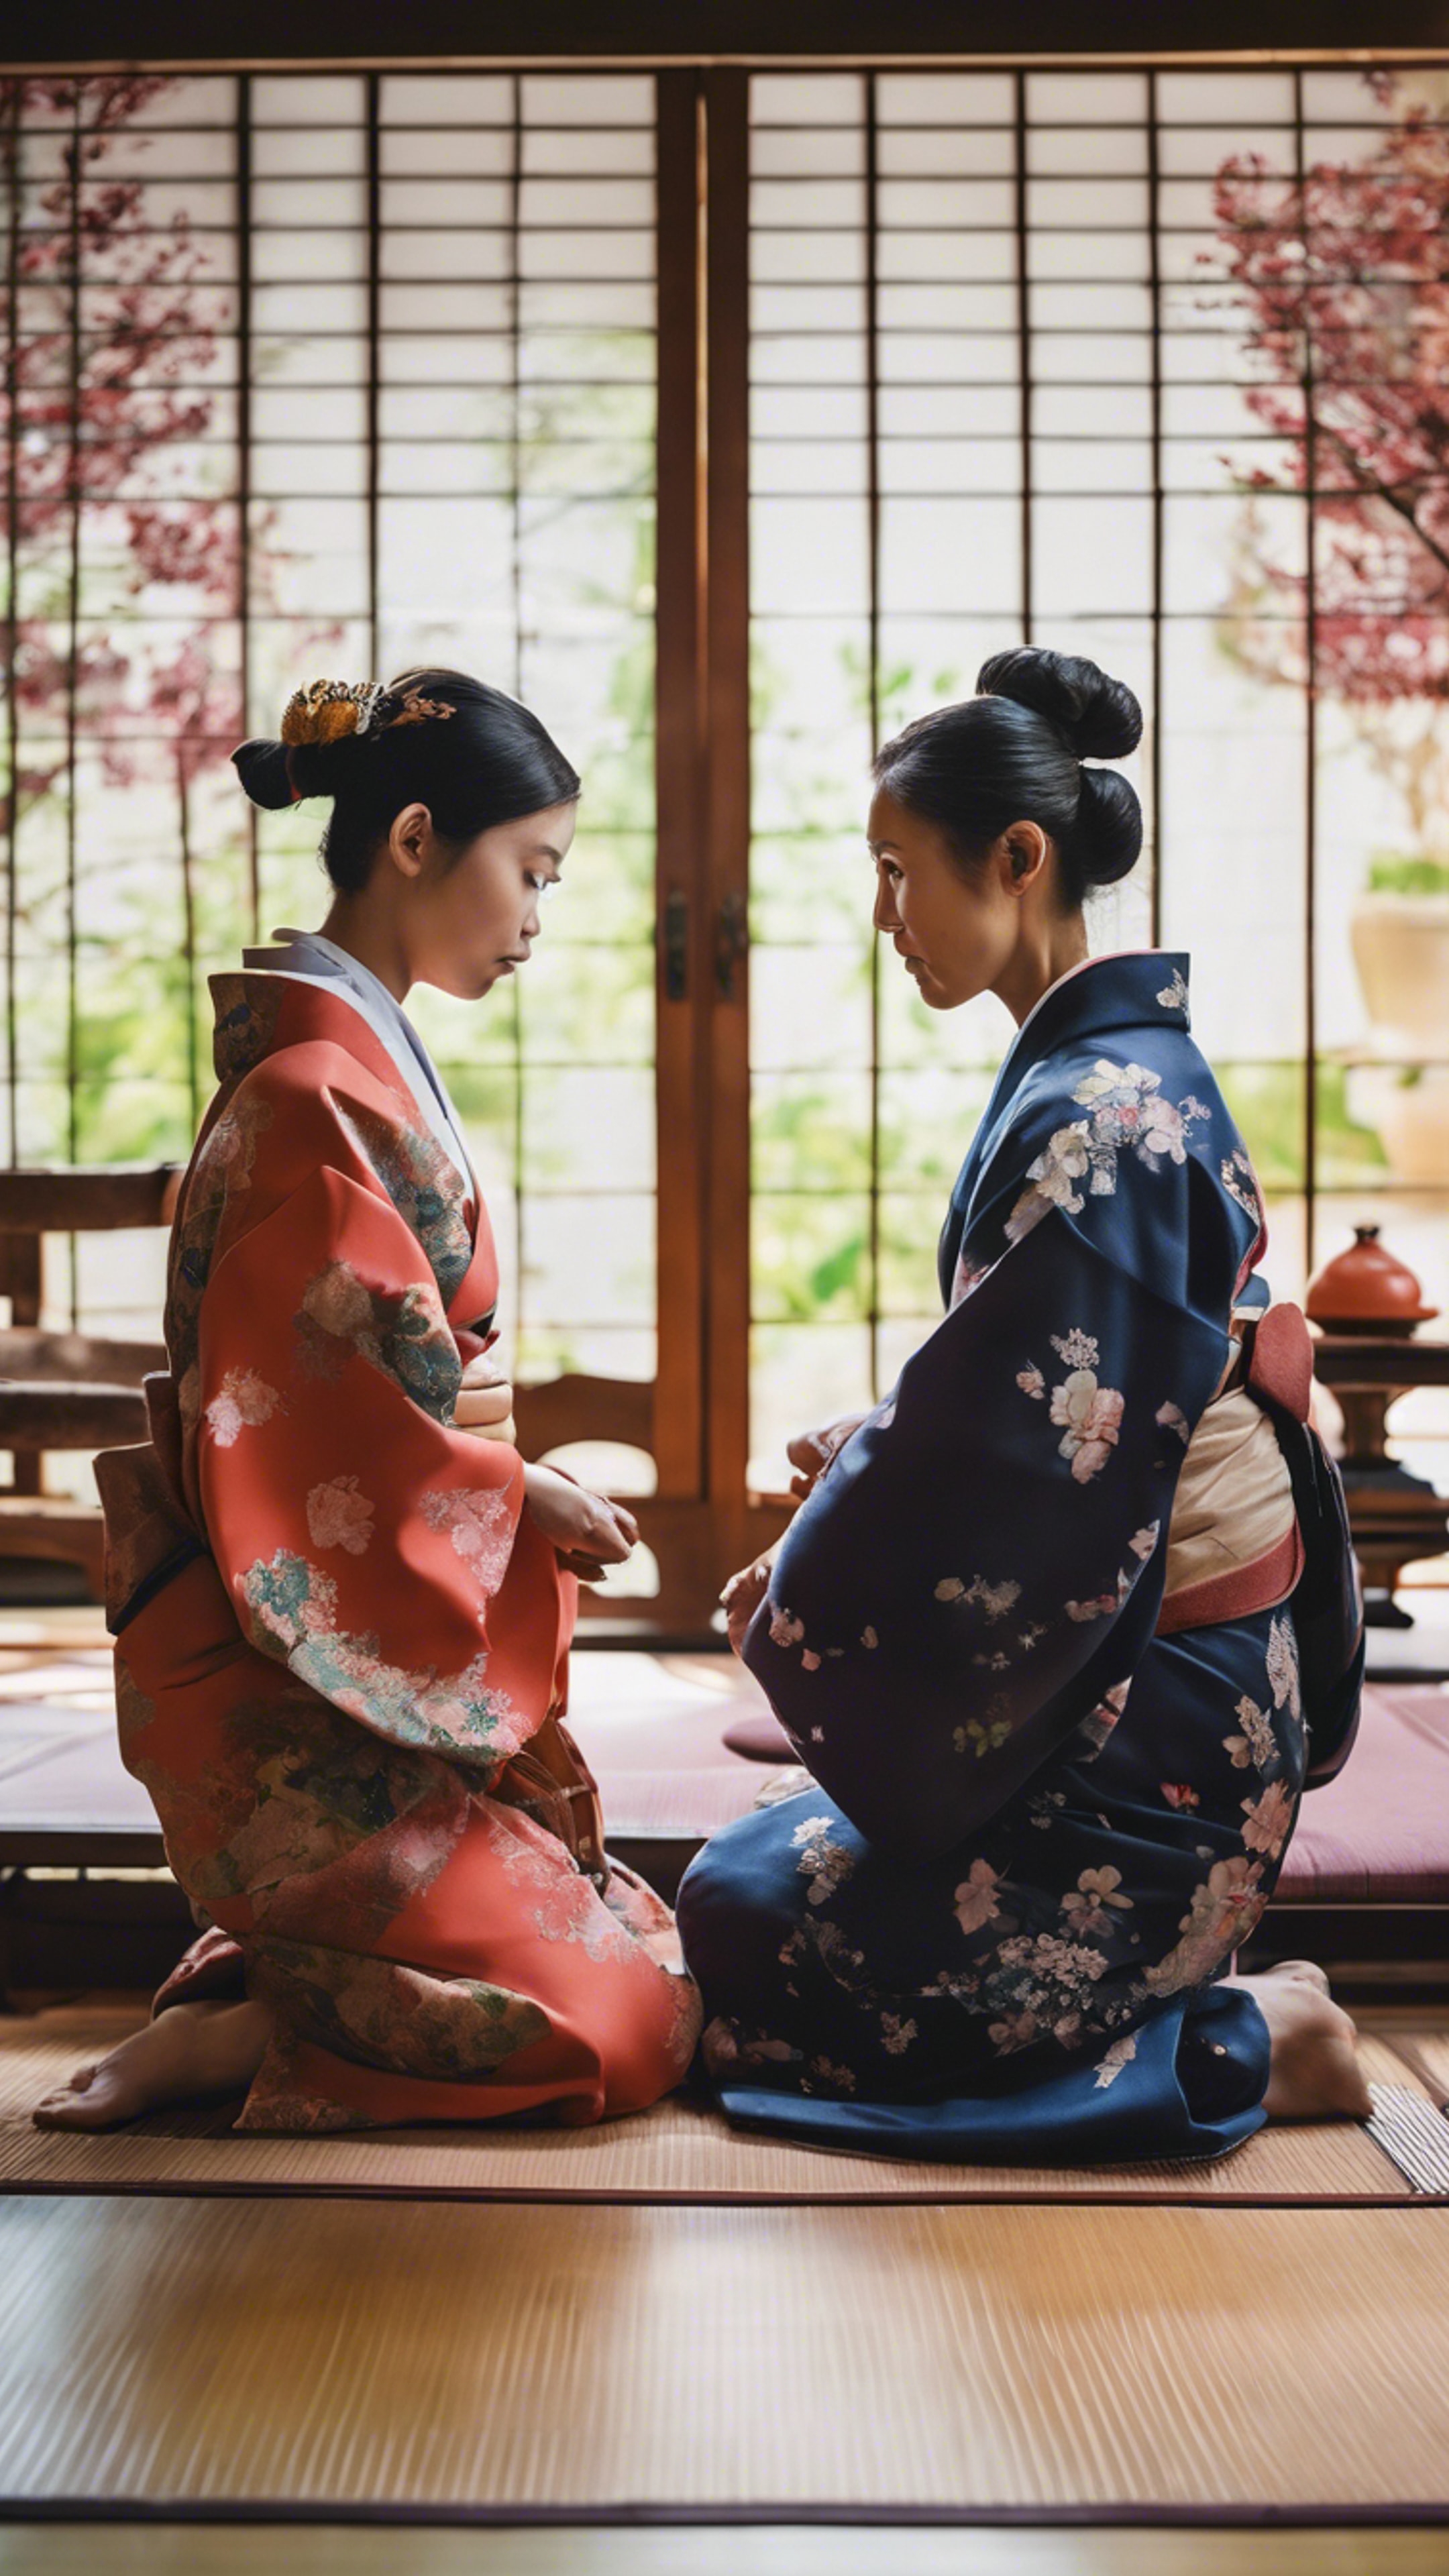 A young girl and her grandmother attending a Japanese tea ceremony, both wearing vibrant kimonos, lost in deep concentration. Wallpaper[e3fe20f234634e71b2cc]